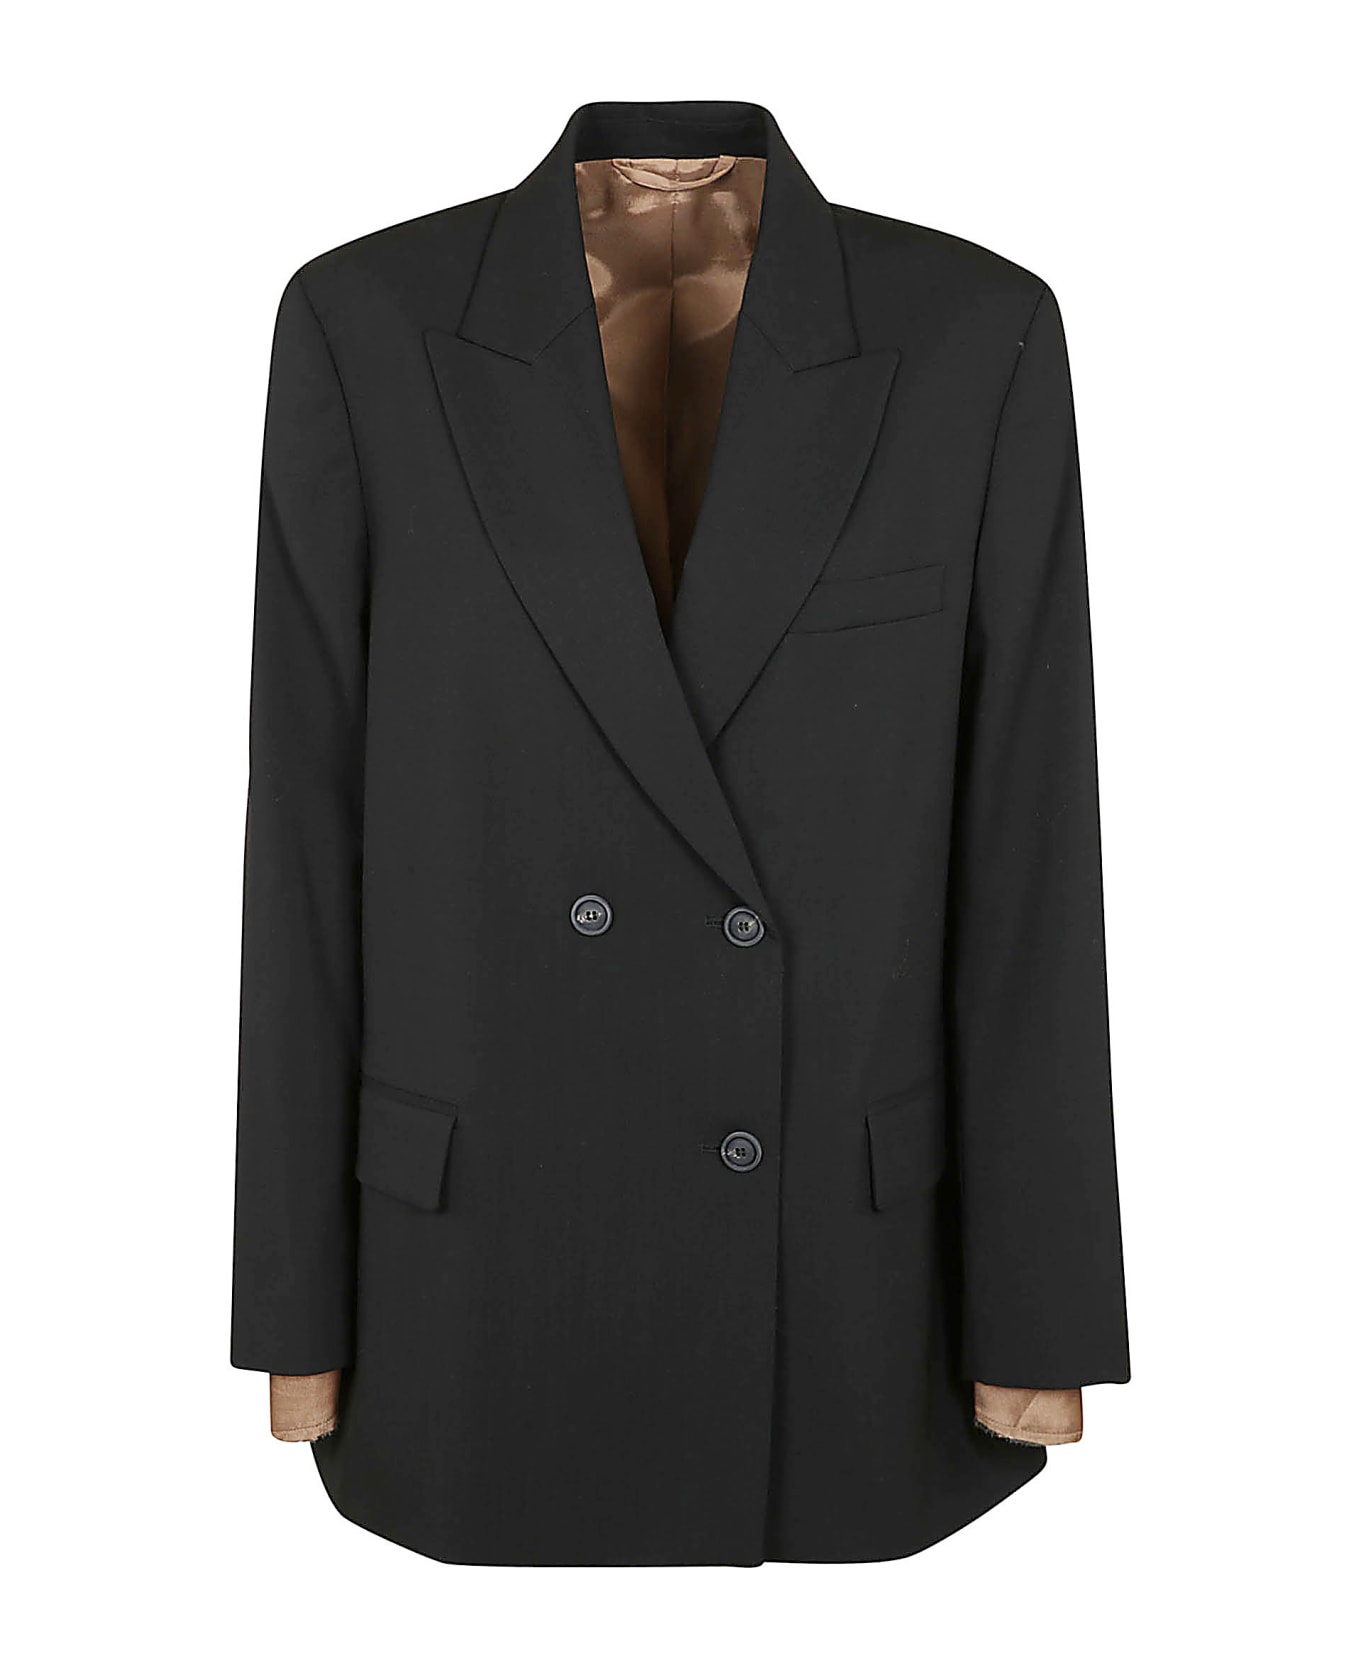 Maison Flaneur Double-breasted Formal Dinner Jacket - Black ブレザー